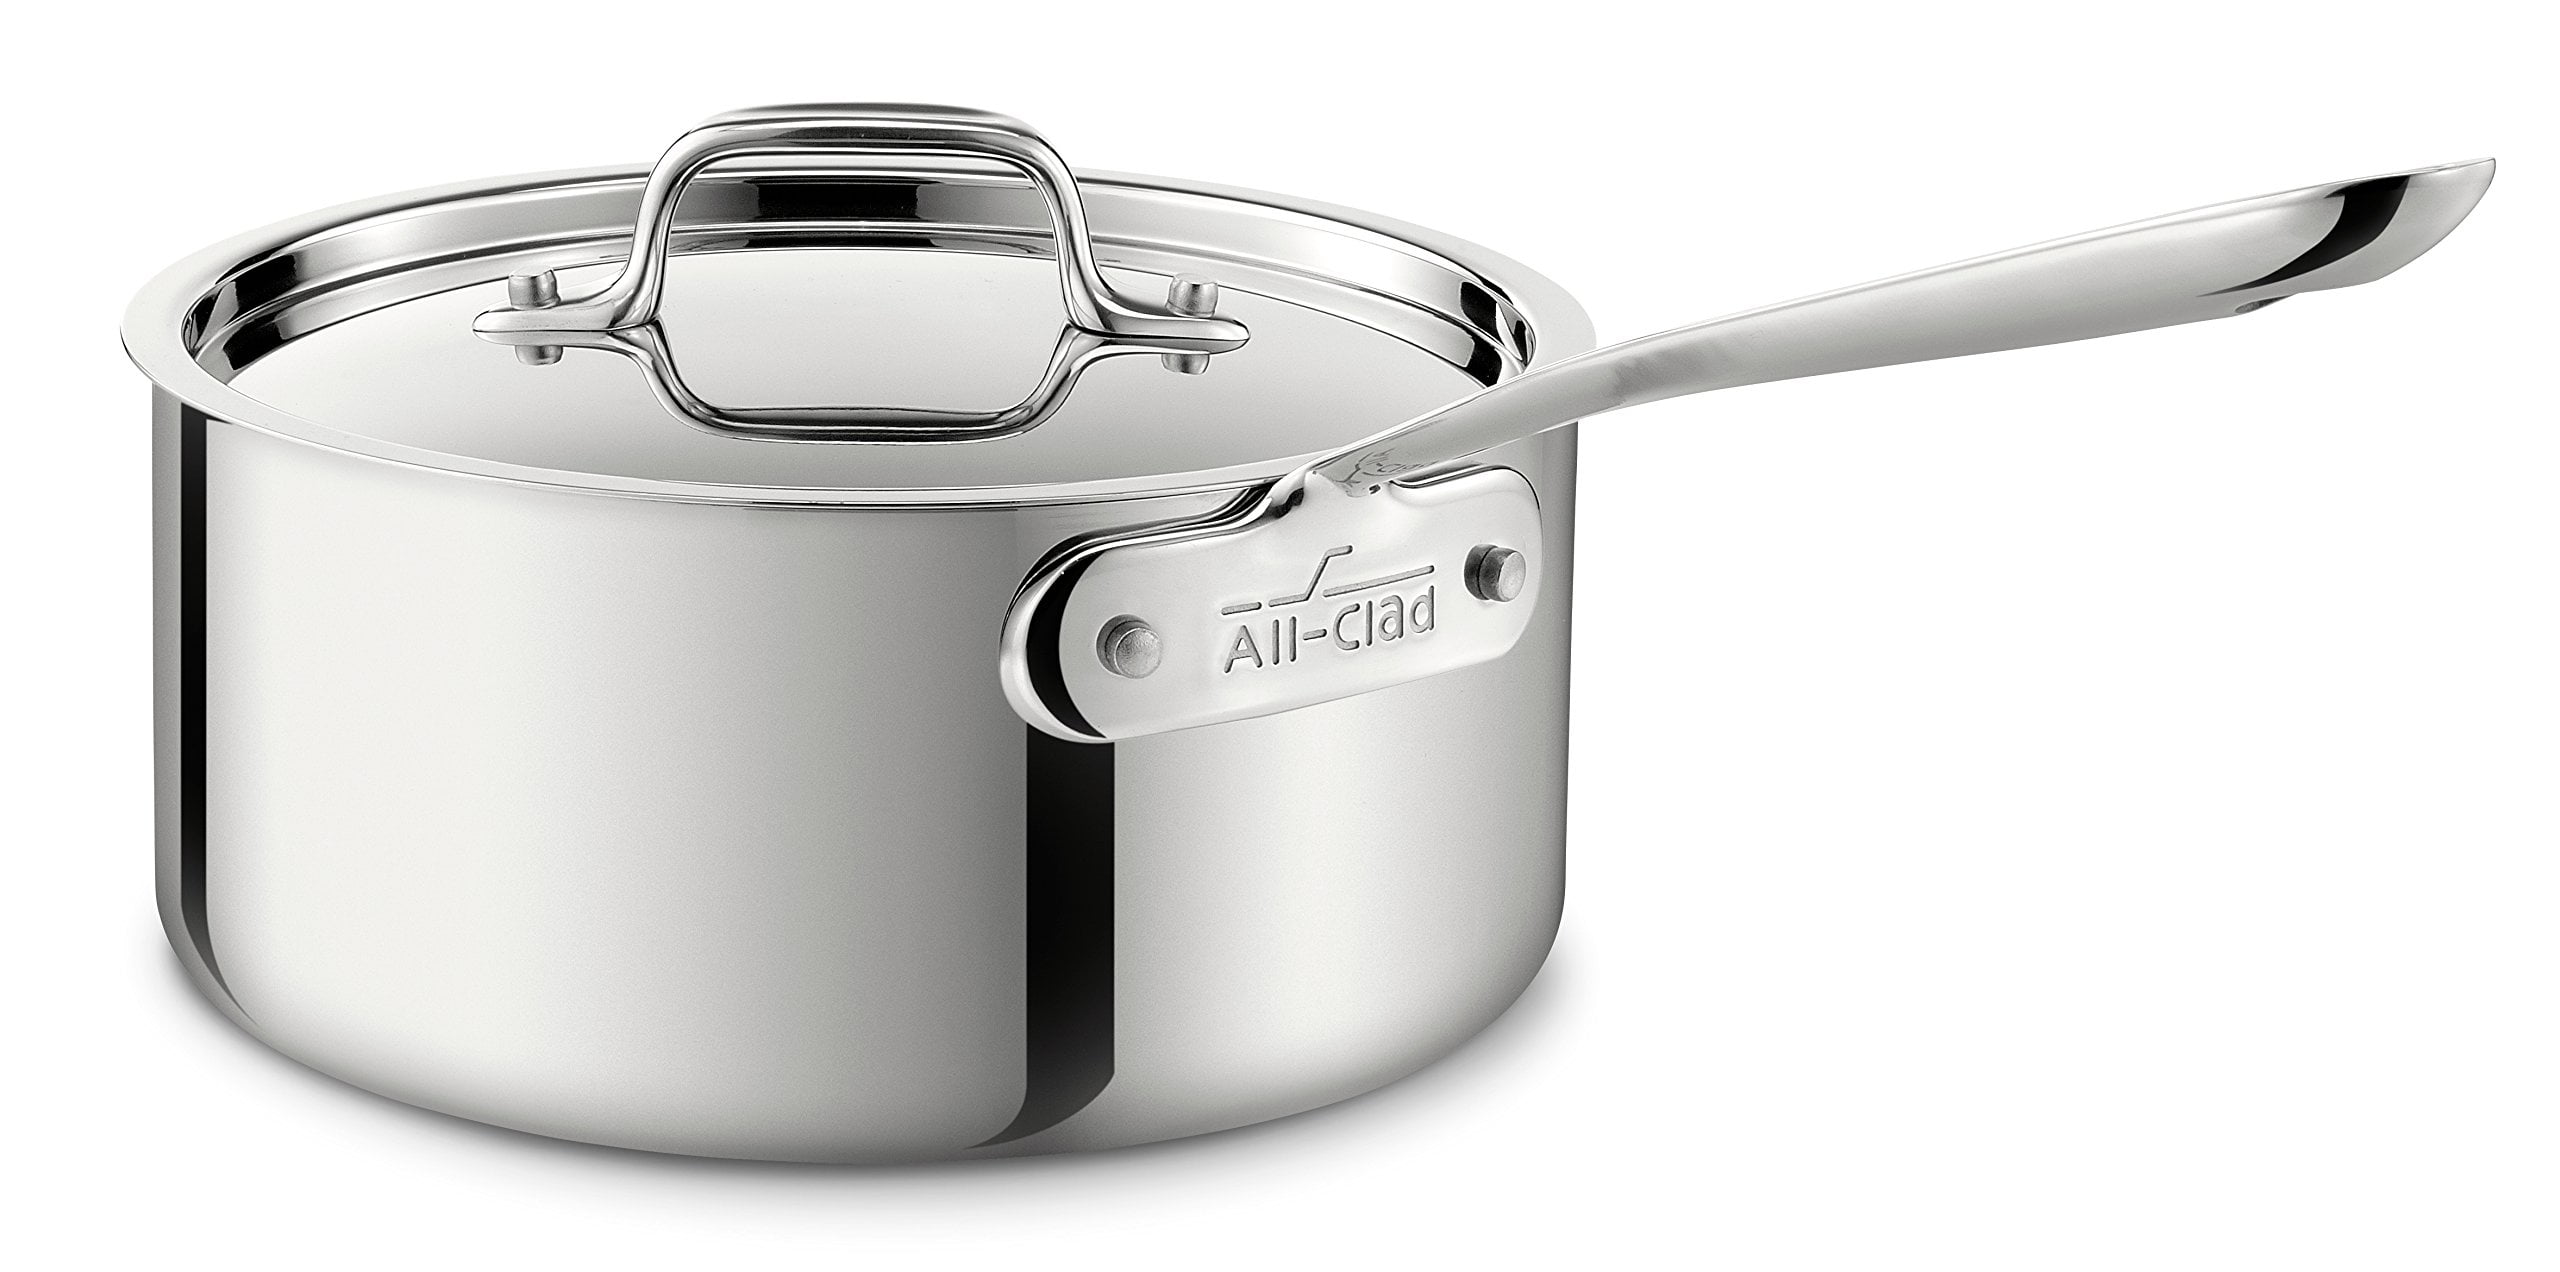 SLOTTET Tri-Ply Whole-Clad Stainless Steel Sauce Pan with Steamer